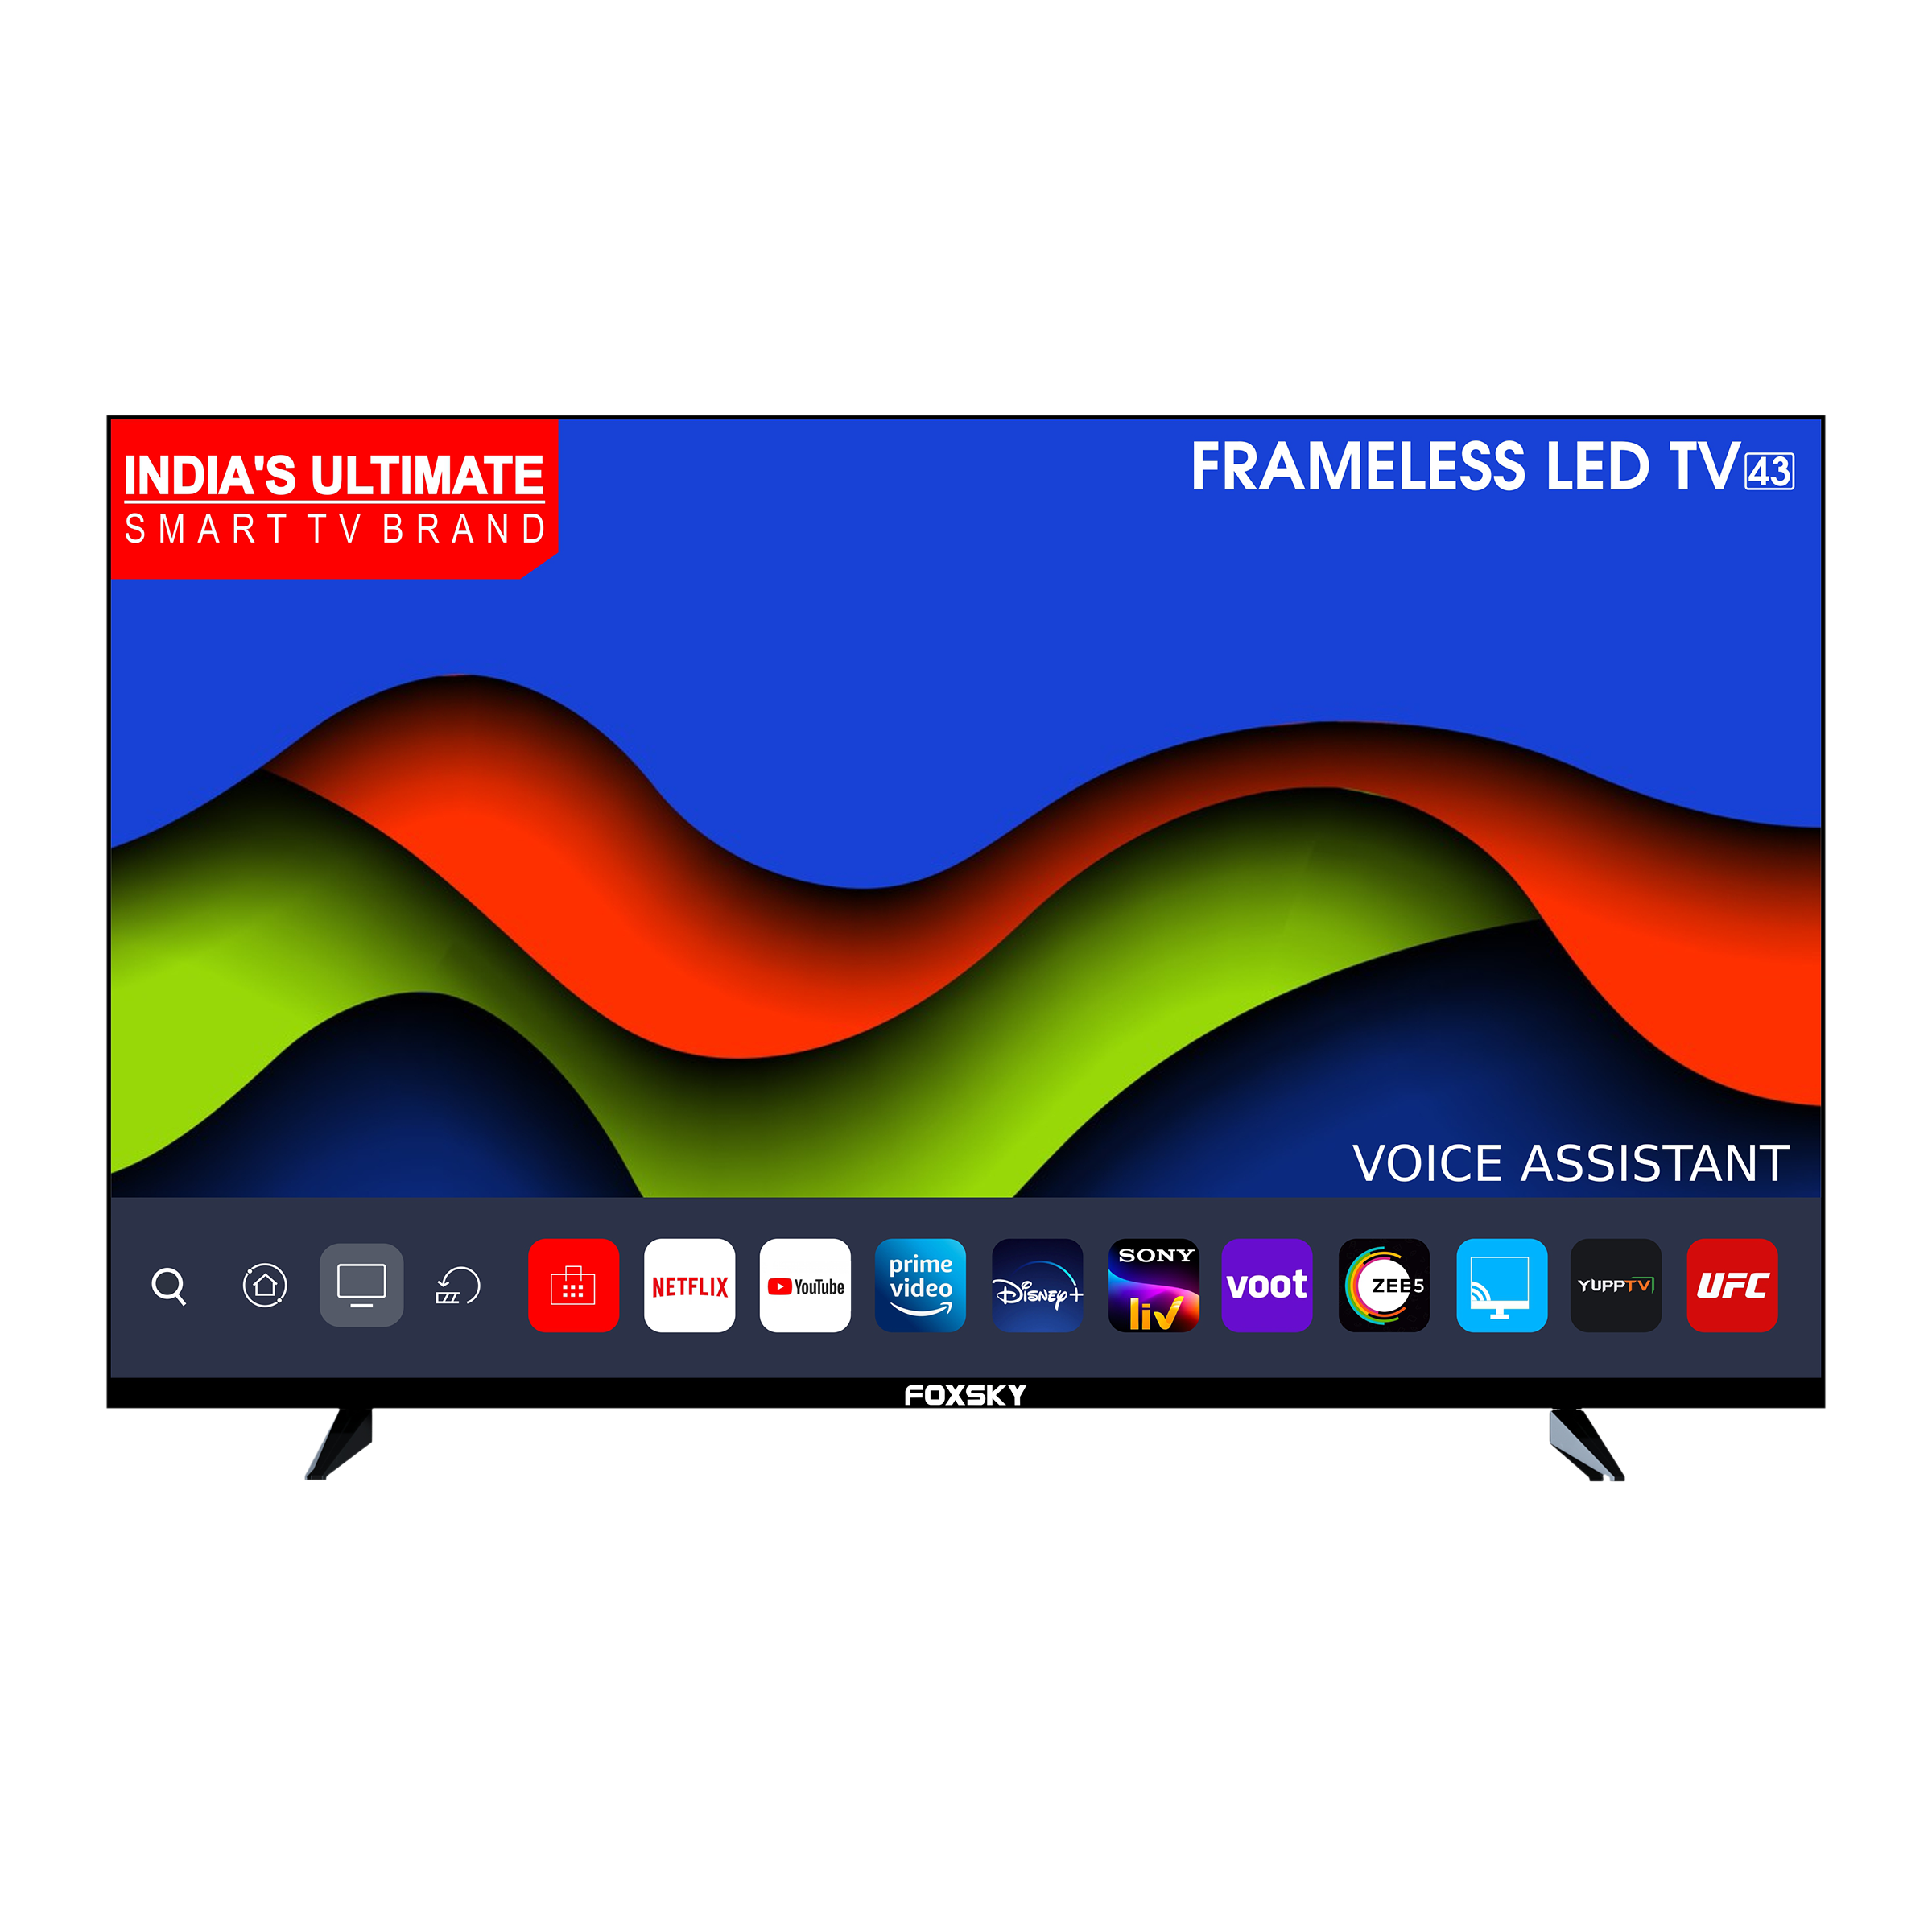 Foxsky 108cm (43 Inches) Full HD LED Android Smart TV (With Voice Assistant, 43FS-VS, Black)_1